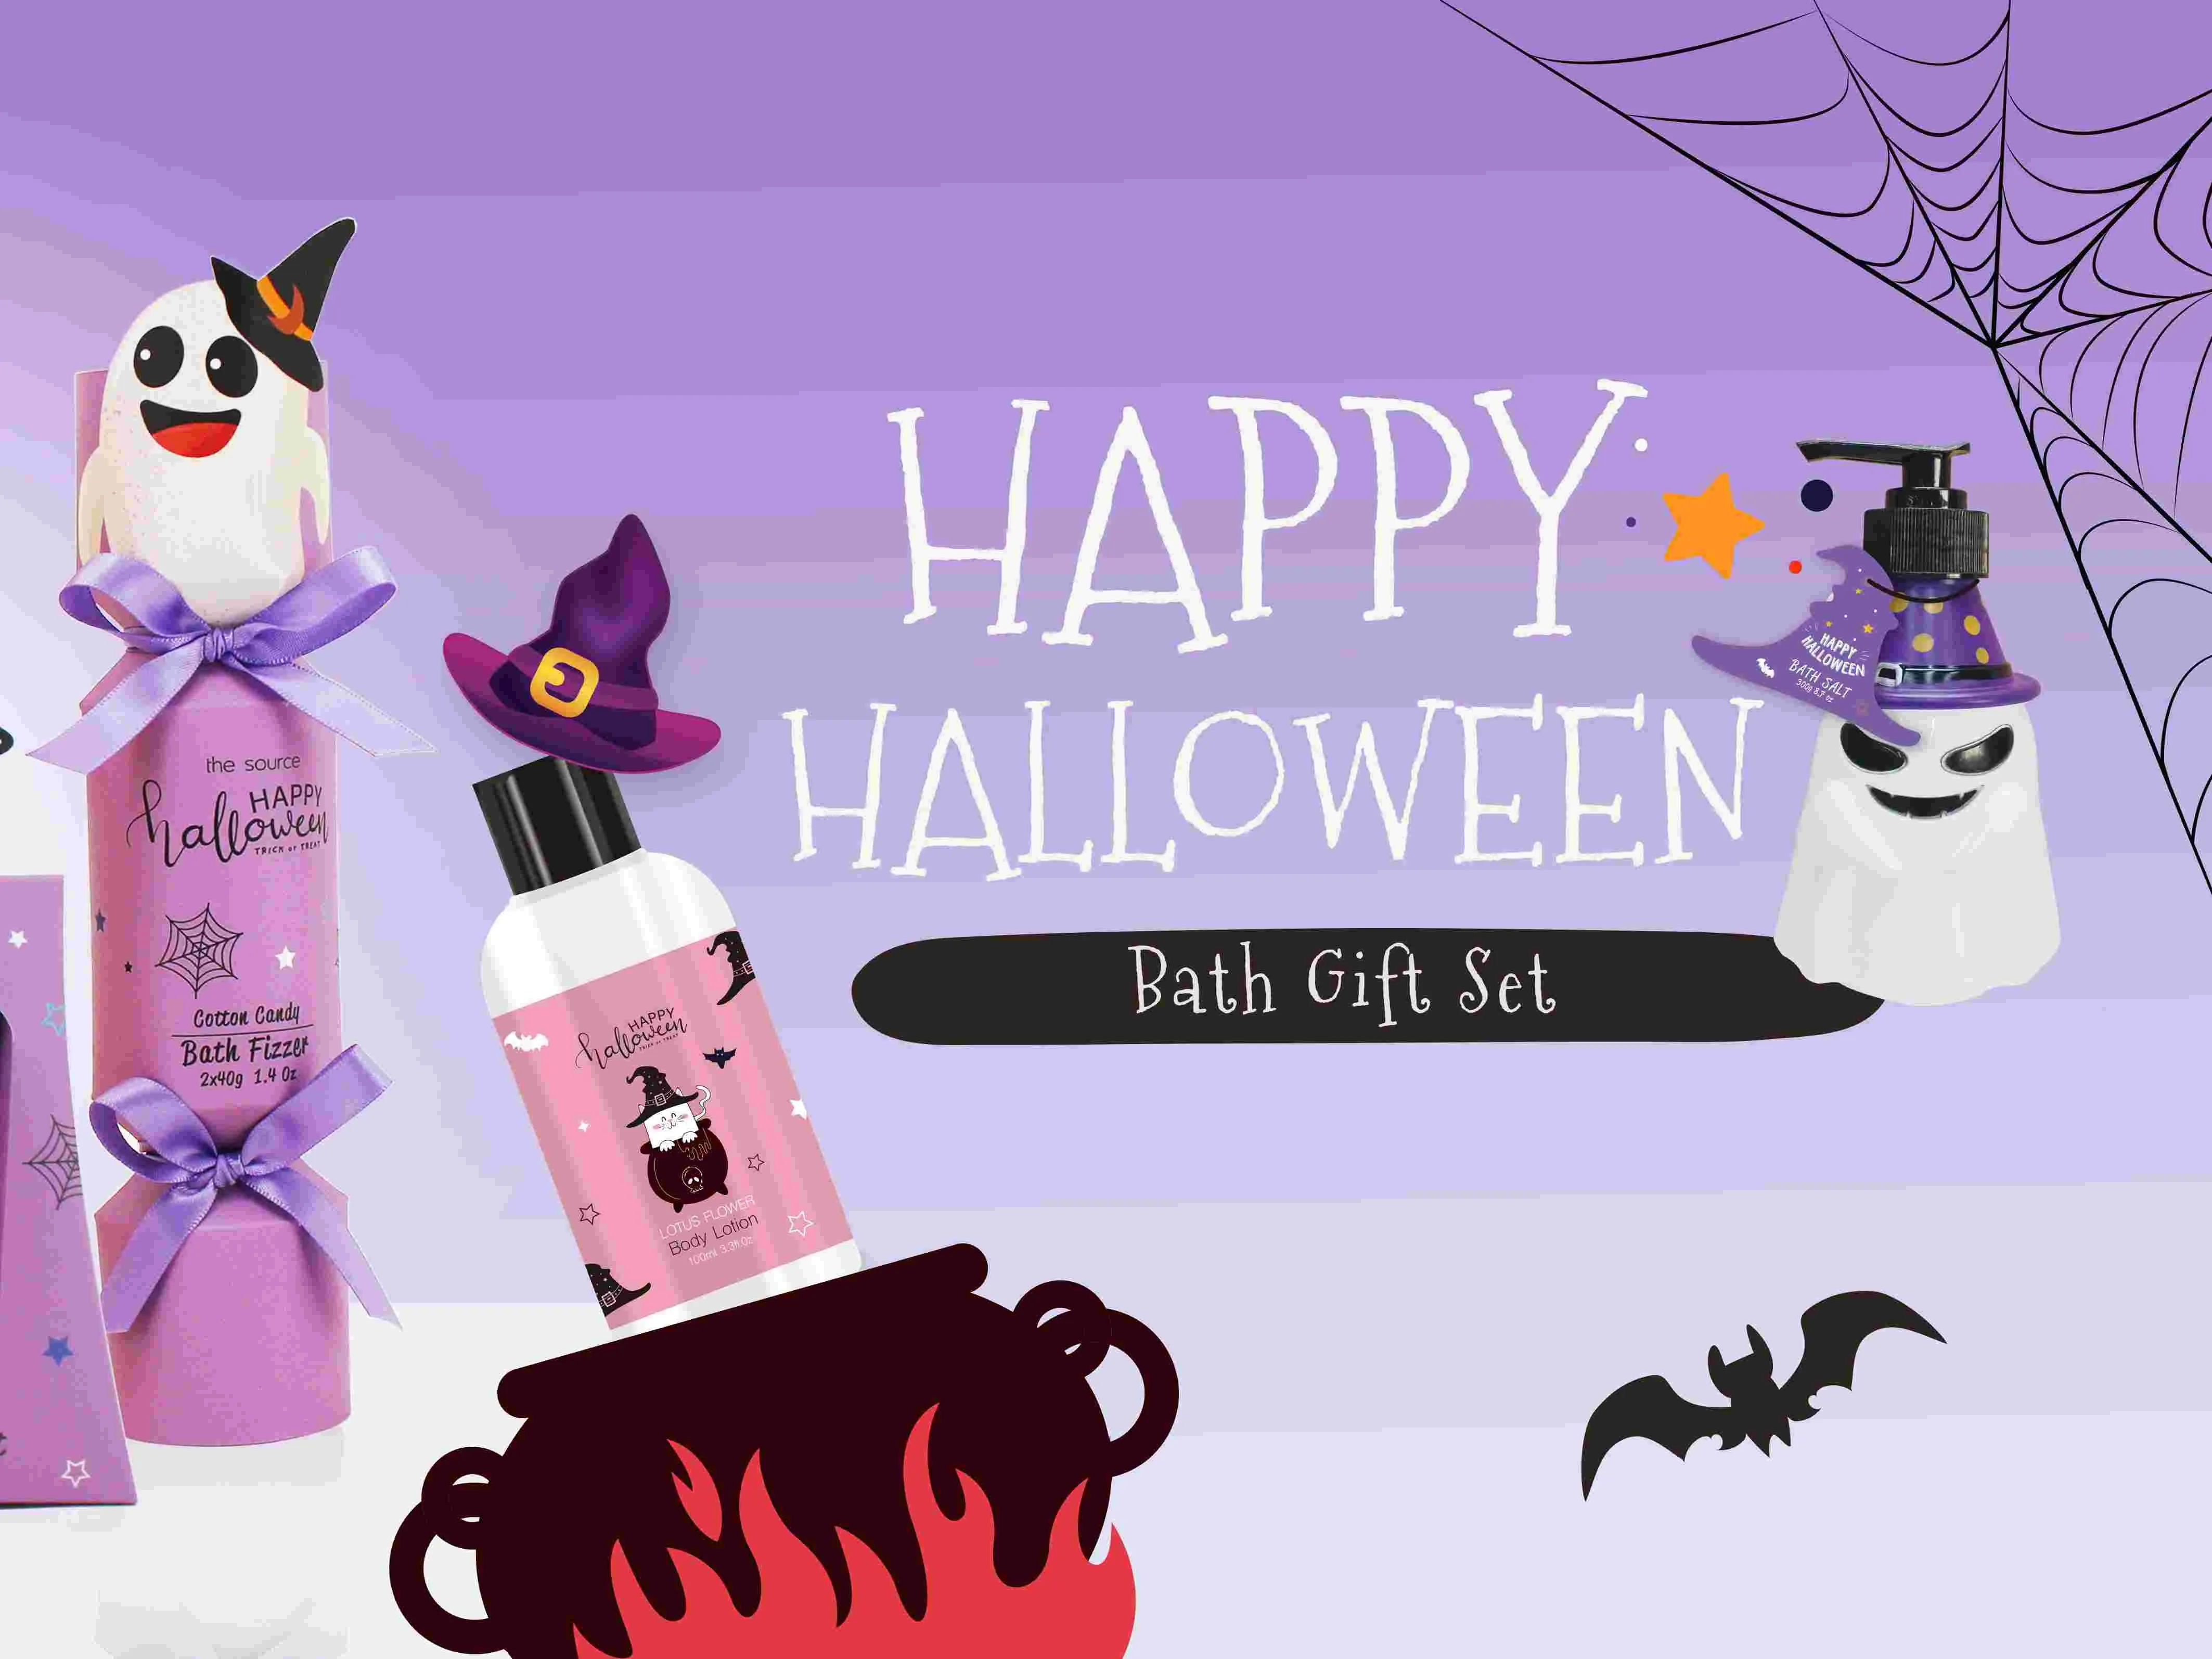 What Makes a Bath Gift Set Halloween-Themed?